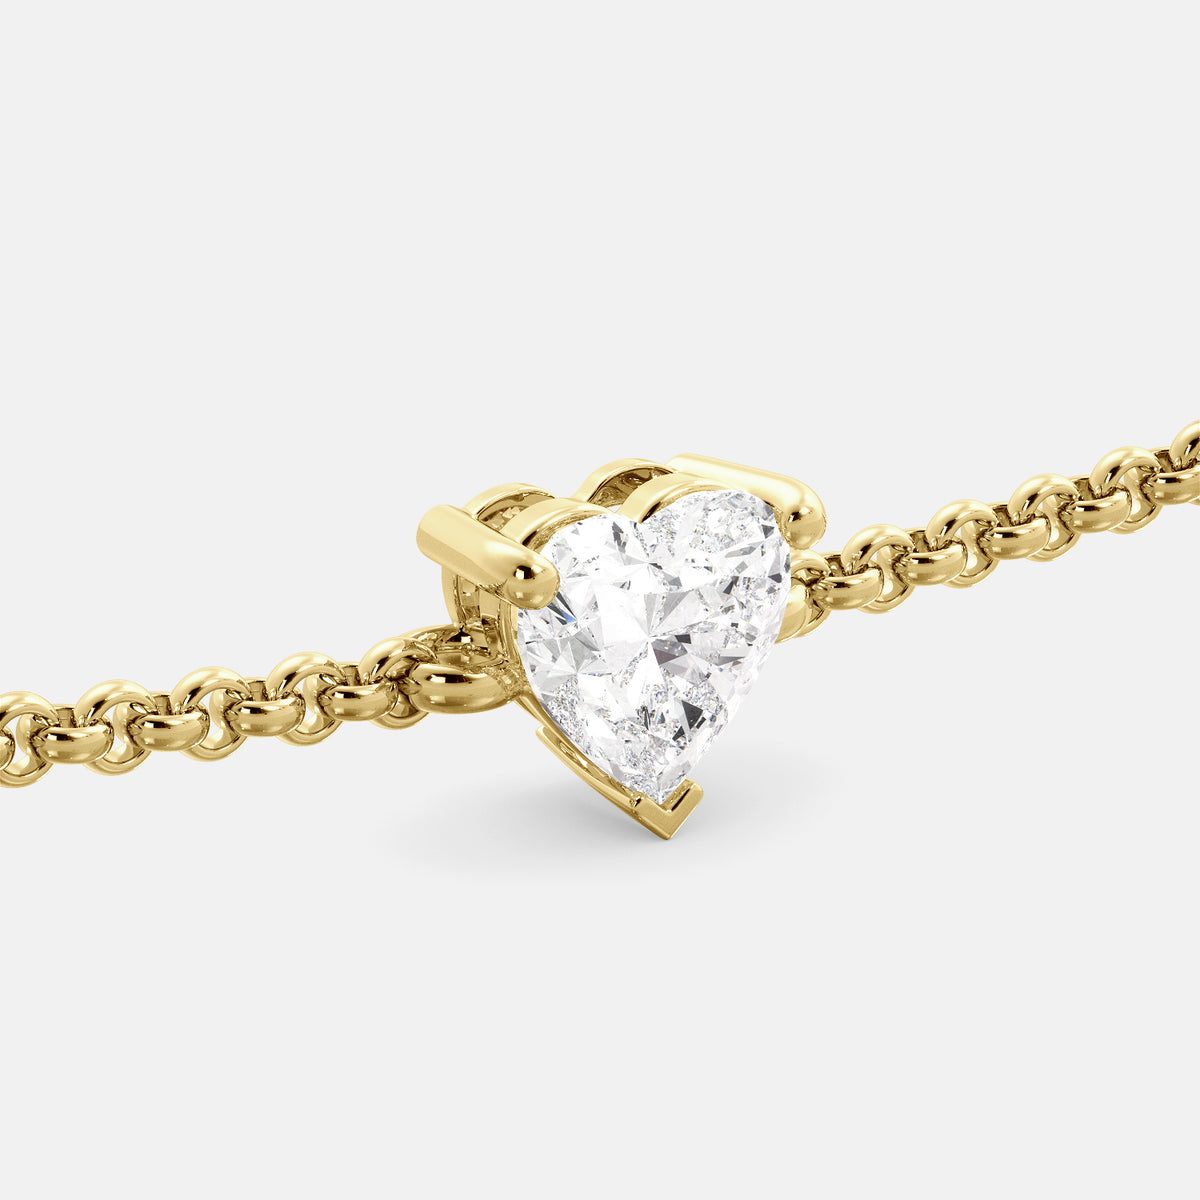 A close-up of a heart-shaped diamond bracelet in recycled yellow gold. The bracelet is set with a single, large diamond in the center of a heart-shaped pendant. The bracelet is made of recycled yellow gold and has a simple, elegant design. The diamond is sparkling and reflects light beautifully. The bracelet is a perfect gift for a loved one or a special occasion.